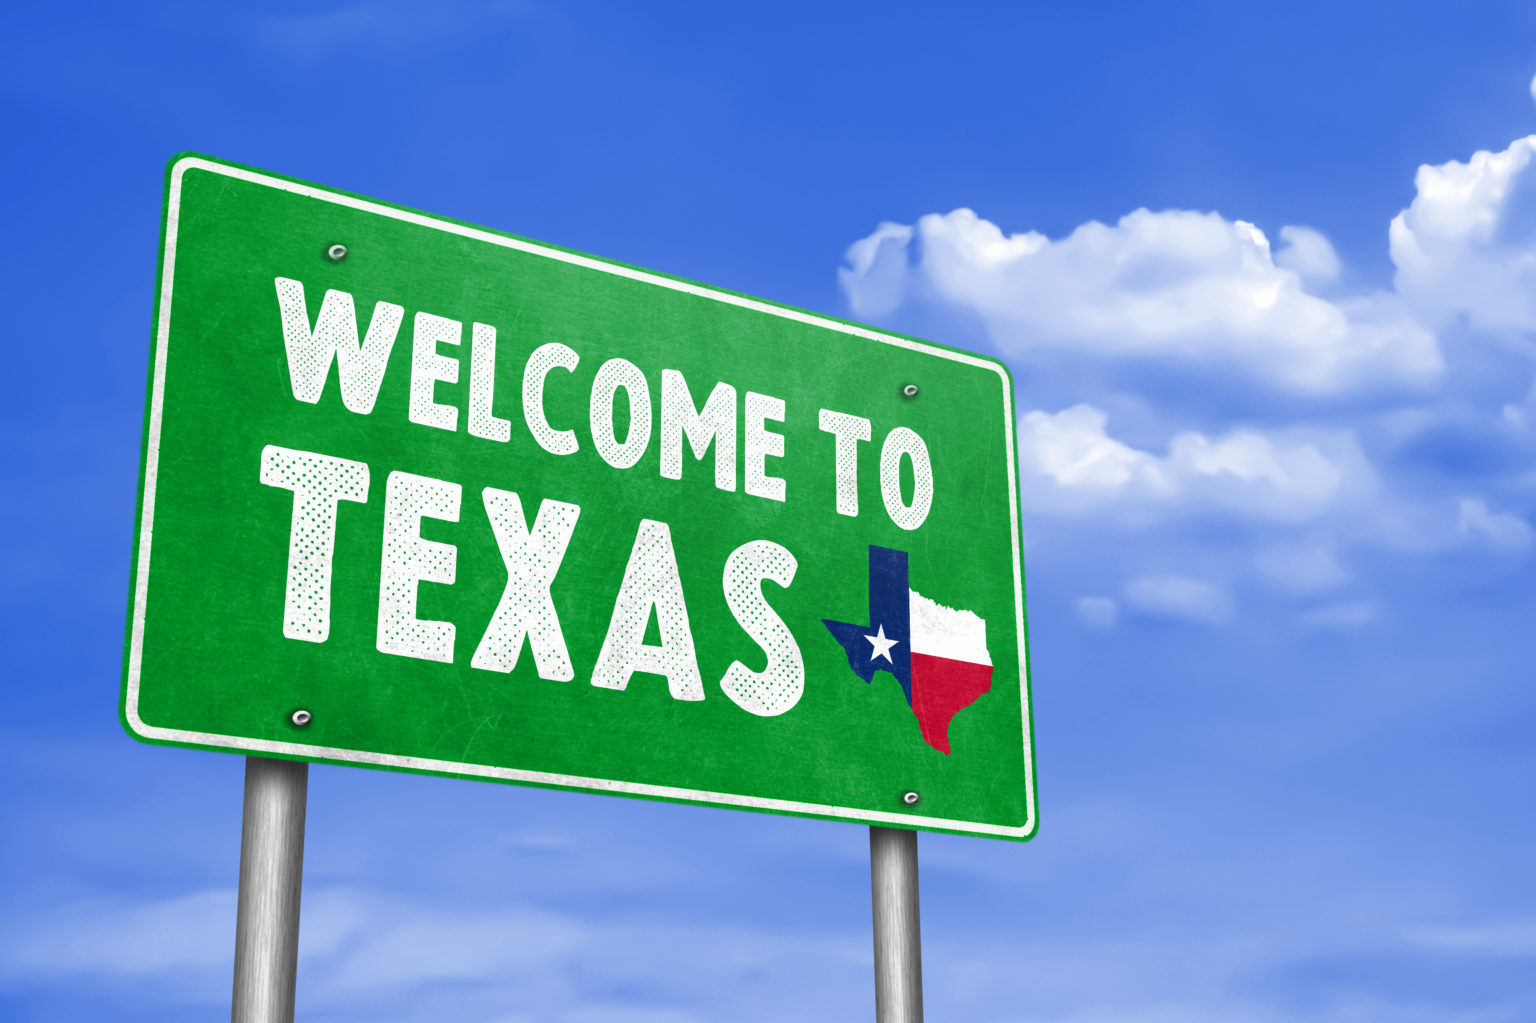 Green billboard against a backdrop of a blue sky with sparse white clouds stating "Welcome To Texas" in white text along with a state of Texas outline featuring the state flag in red, white and blue along with a white star